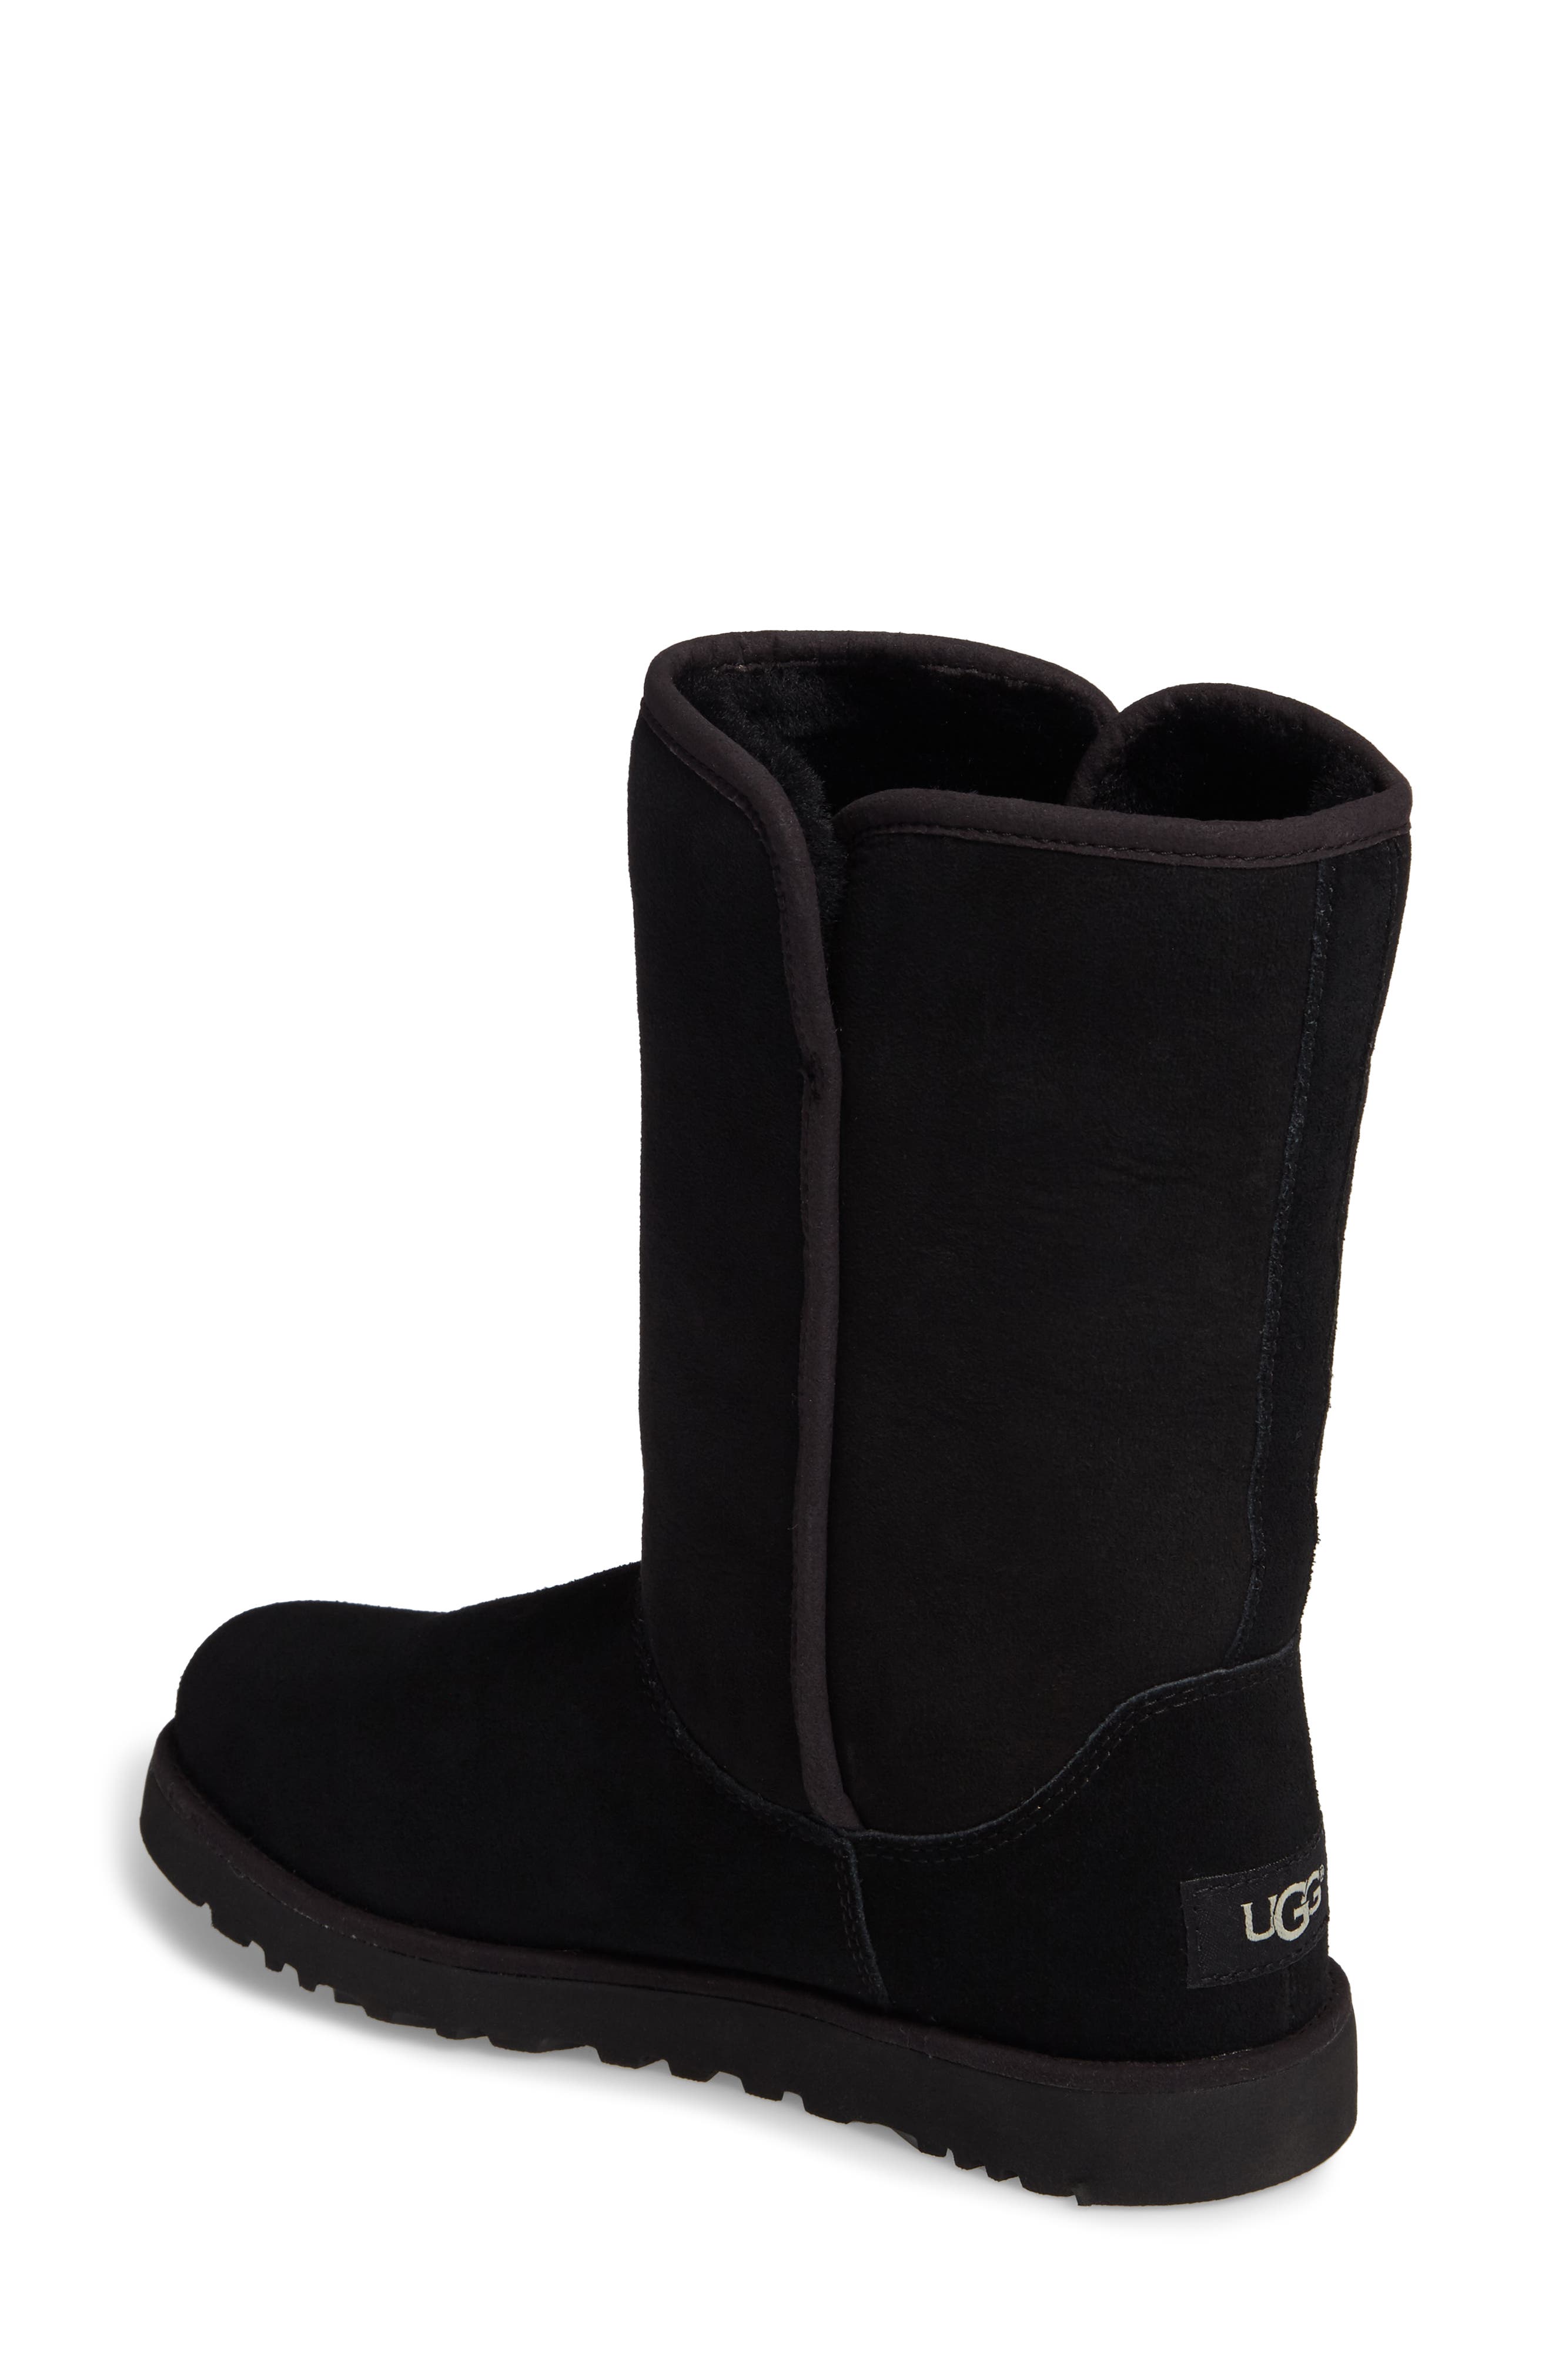 ugg michelle boots black